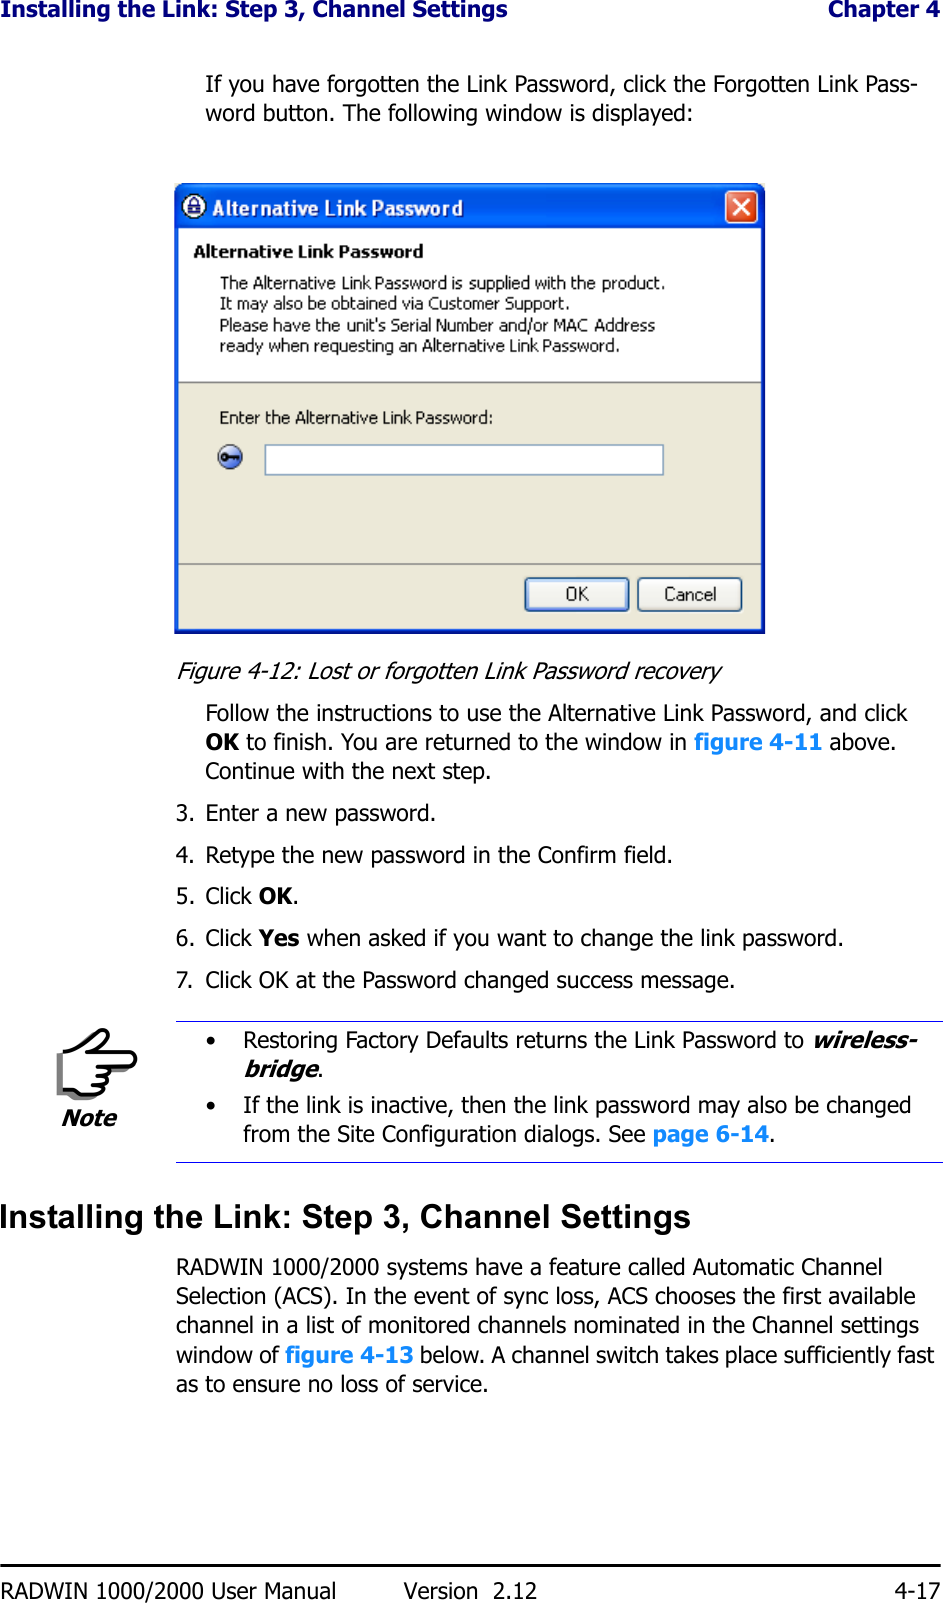 Installing the Link: Step 3, Channel Settings  Chapter 4RADWIN 1000/2000 User Manual Version  2.12 4-17If you have forgotten the Link Password, click the Forgotten Link Pass-word button. The following window is displayed:Figure 4-12: Lost or forgotten Link Password recoveryFollow the instructions to use the Alternative Link Password, and click OK to finish. You are returned to the window in figure 4-11 above. Continue with the next step.3. Enter a new password.4. Retype the new password in the Confirm field.5. Click OK.6. Click Yes when asked if you want to change the link password.7. Click OK at the Password changed success message.Installing the Link: Step 3, Channel SettingsRADWIN 1000/2000 systems have a feature called Automatic Channel Selection (ACS). In the event of sync loss, ACS chooses the first available channel in a list of monitored channels nominated in the Channel settings window of figure 4-13 below. A channel switch takes place sufficiently fast as to ensure no loss of service.Note• Restoring Factory Defaults returns the Link Password to wireless-bridge.• If the link is inactive, then the link password may also be changed from the Site Configuration dialogs. See page 6-14.